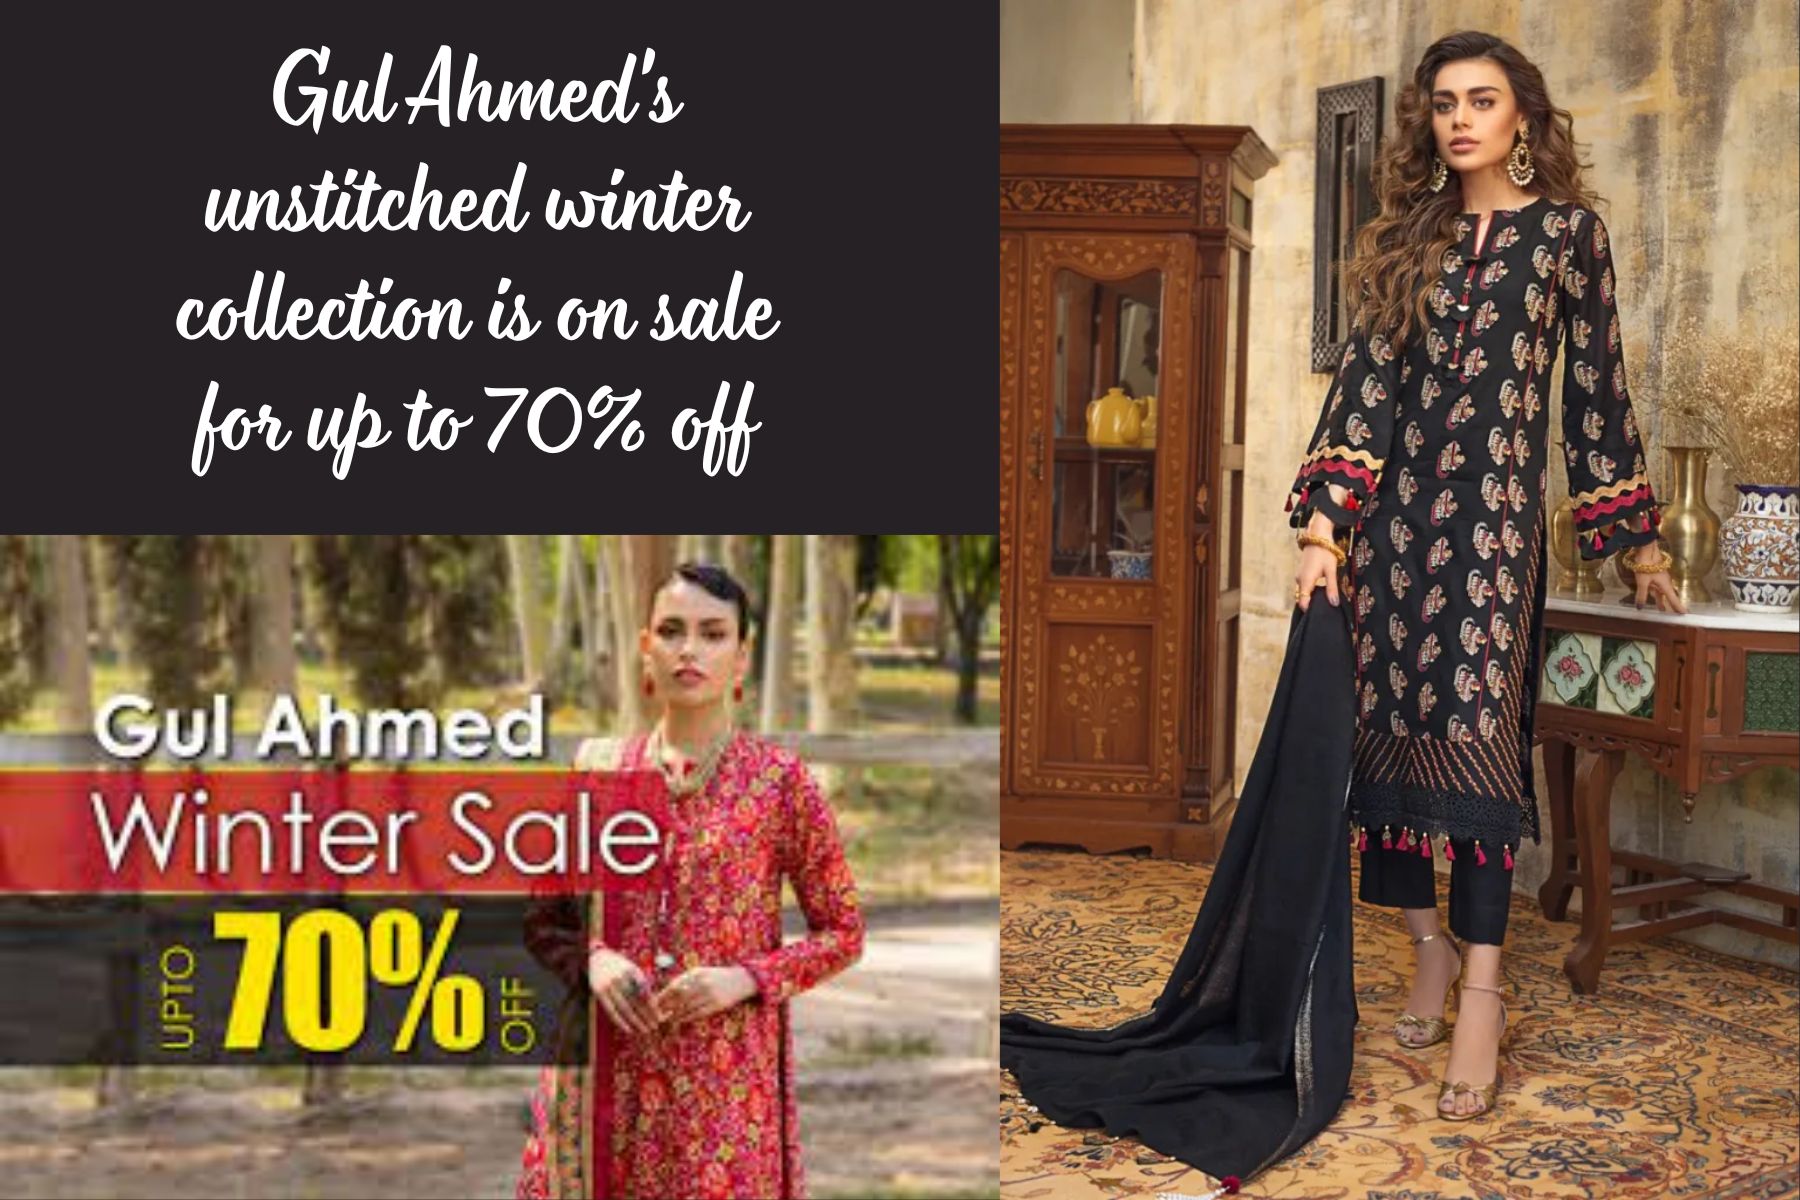 Gul Ahmed's unstitched winter collection